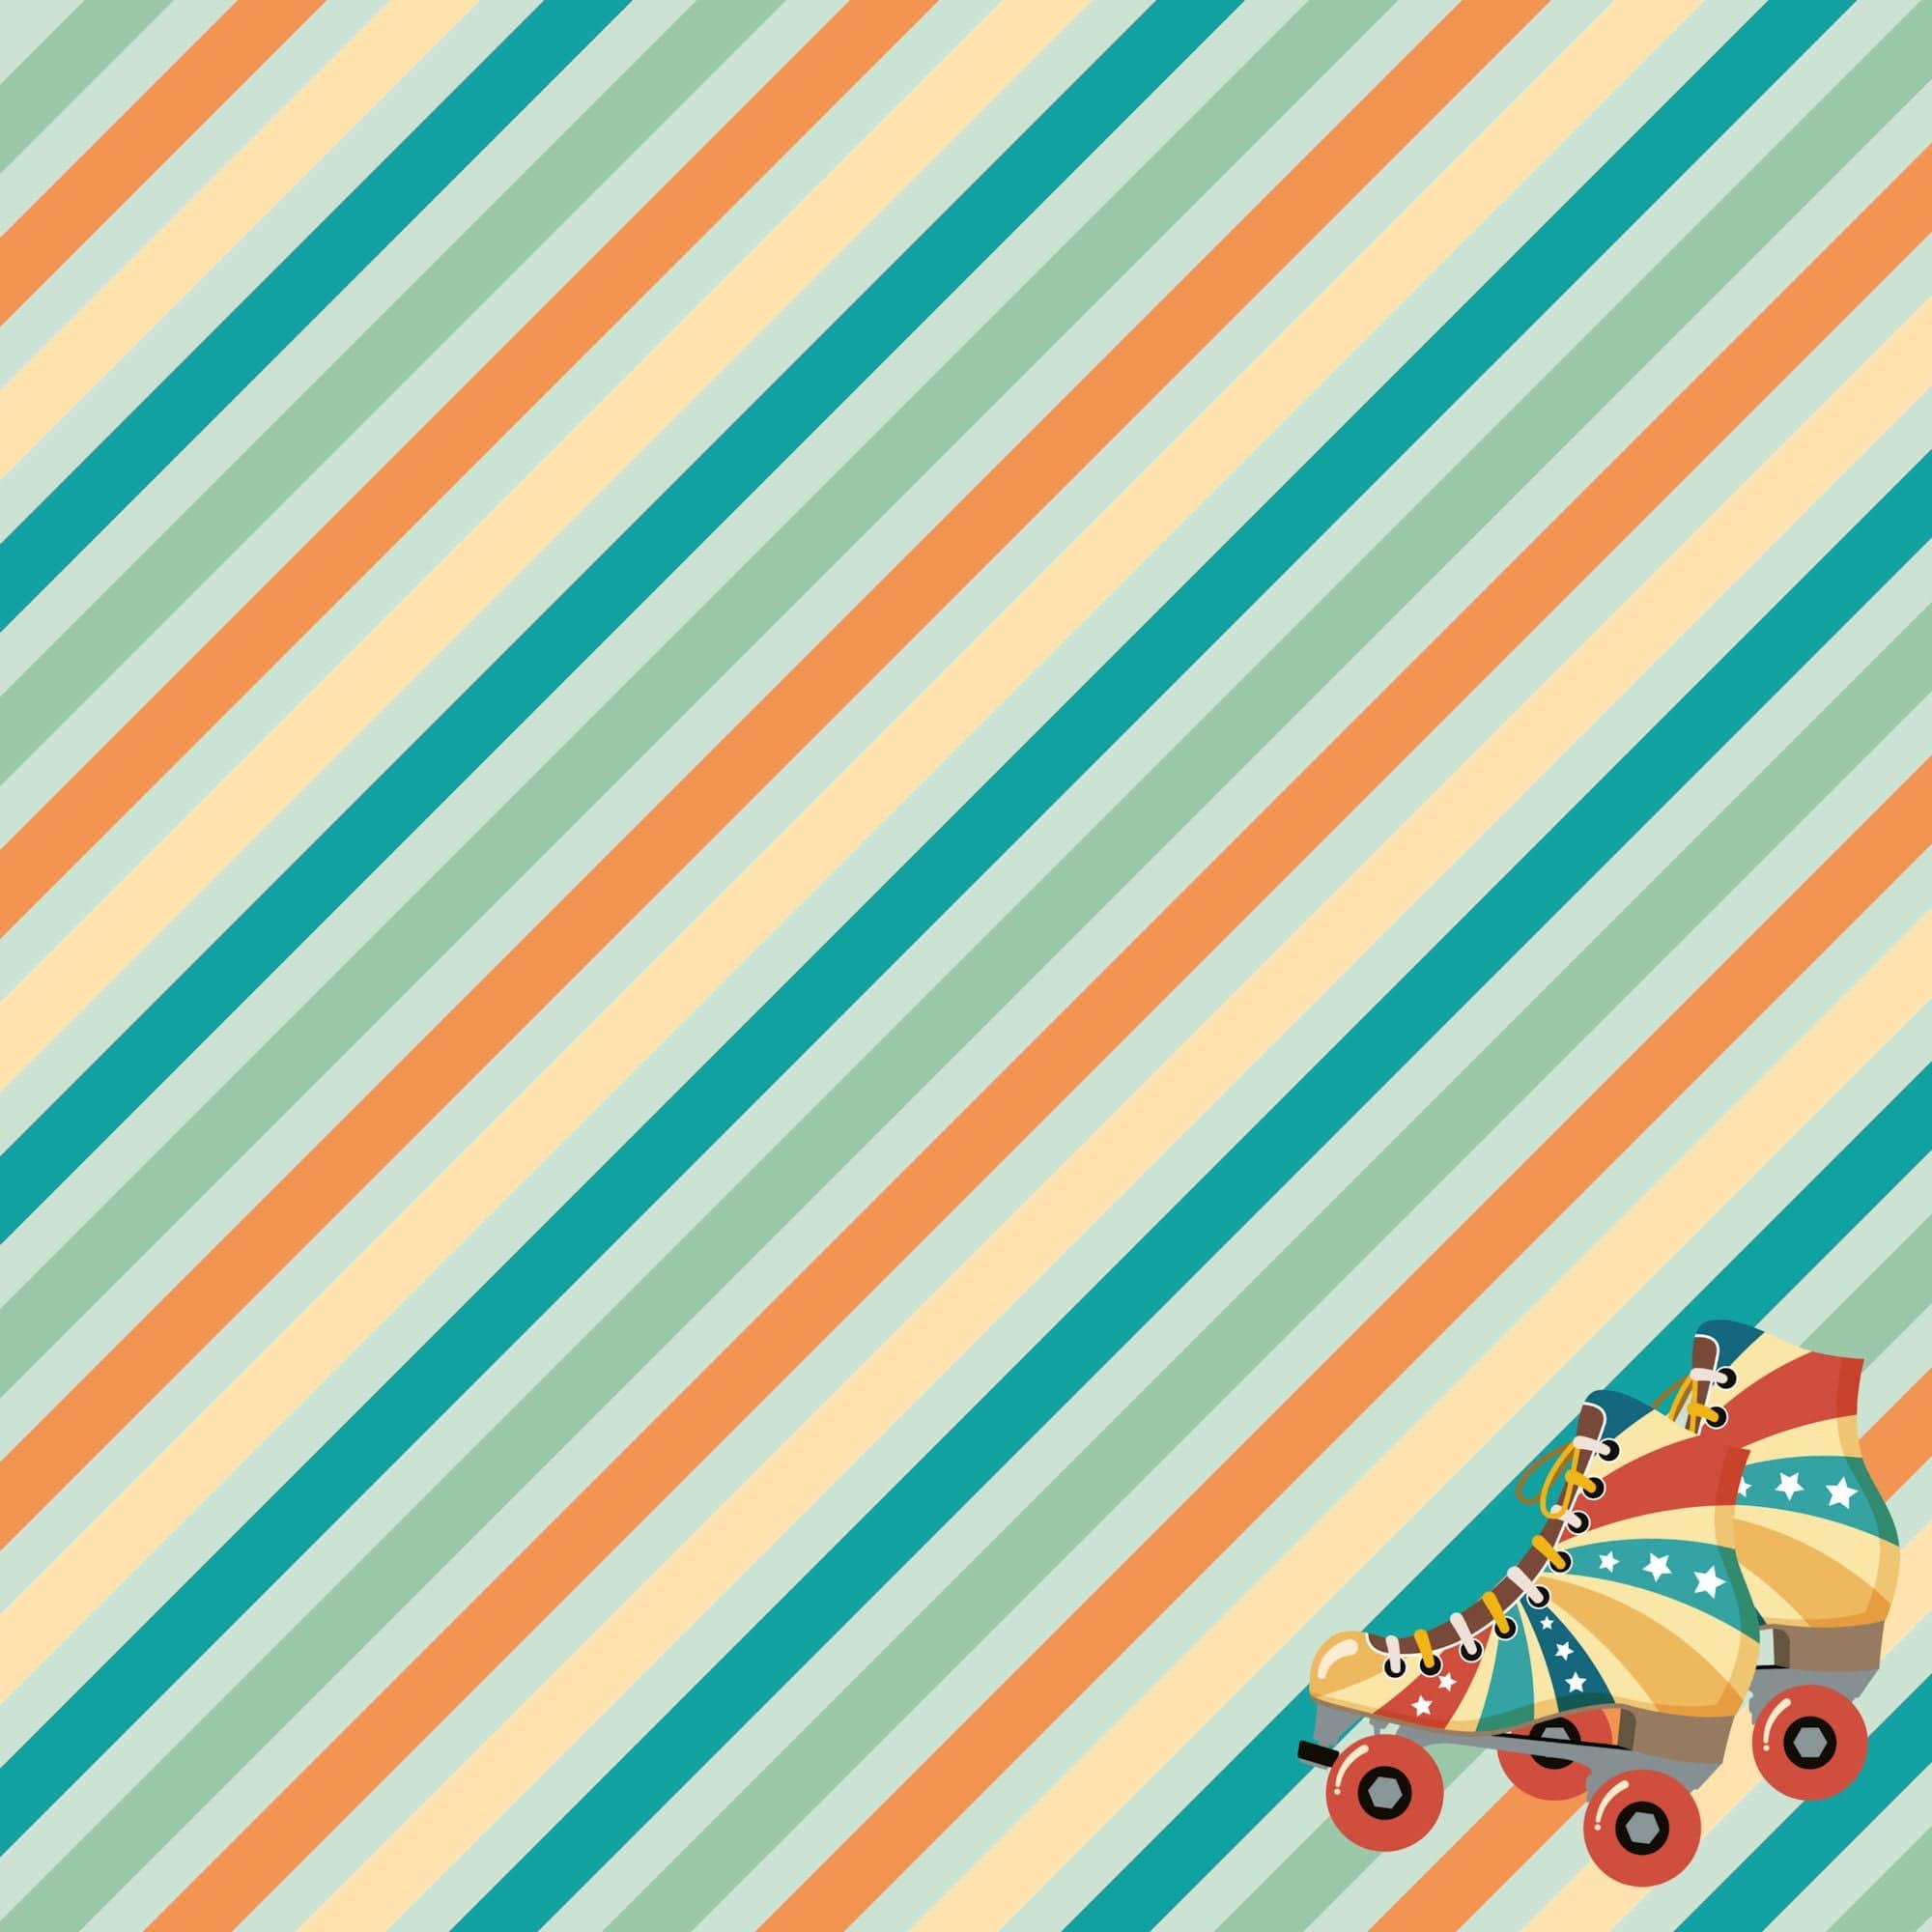 Just Fun Collection Roller Skating 12 x 12 Double-Sided Scrapbook Paper by SSC Designs - Scrapbook Supply Companies